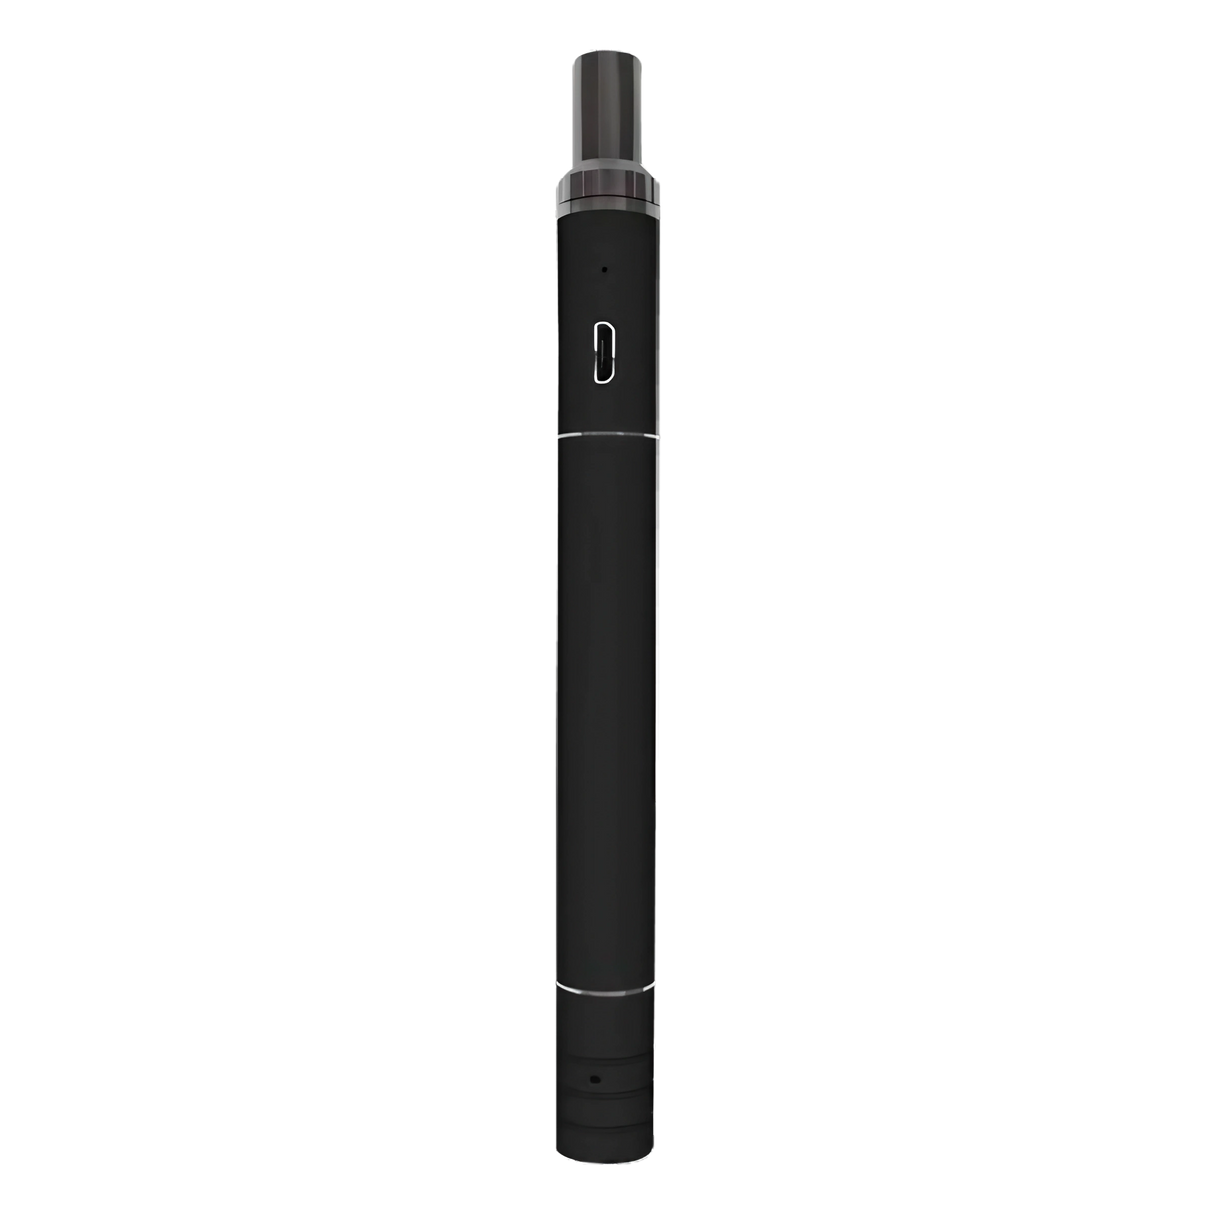 Boundless Terp Pen Vaporizer front view, sleek black, portable for concentrates, with ceramic coil